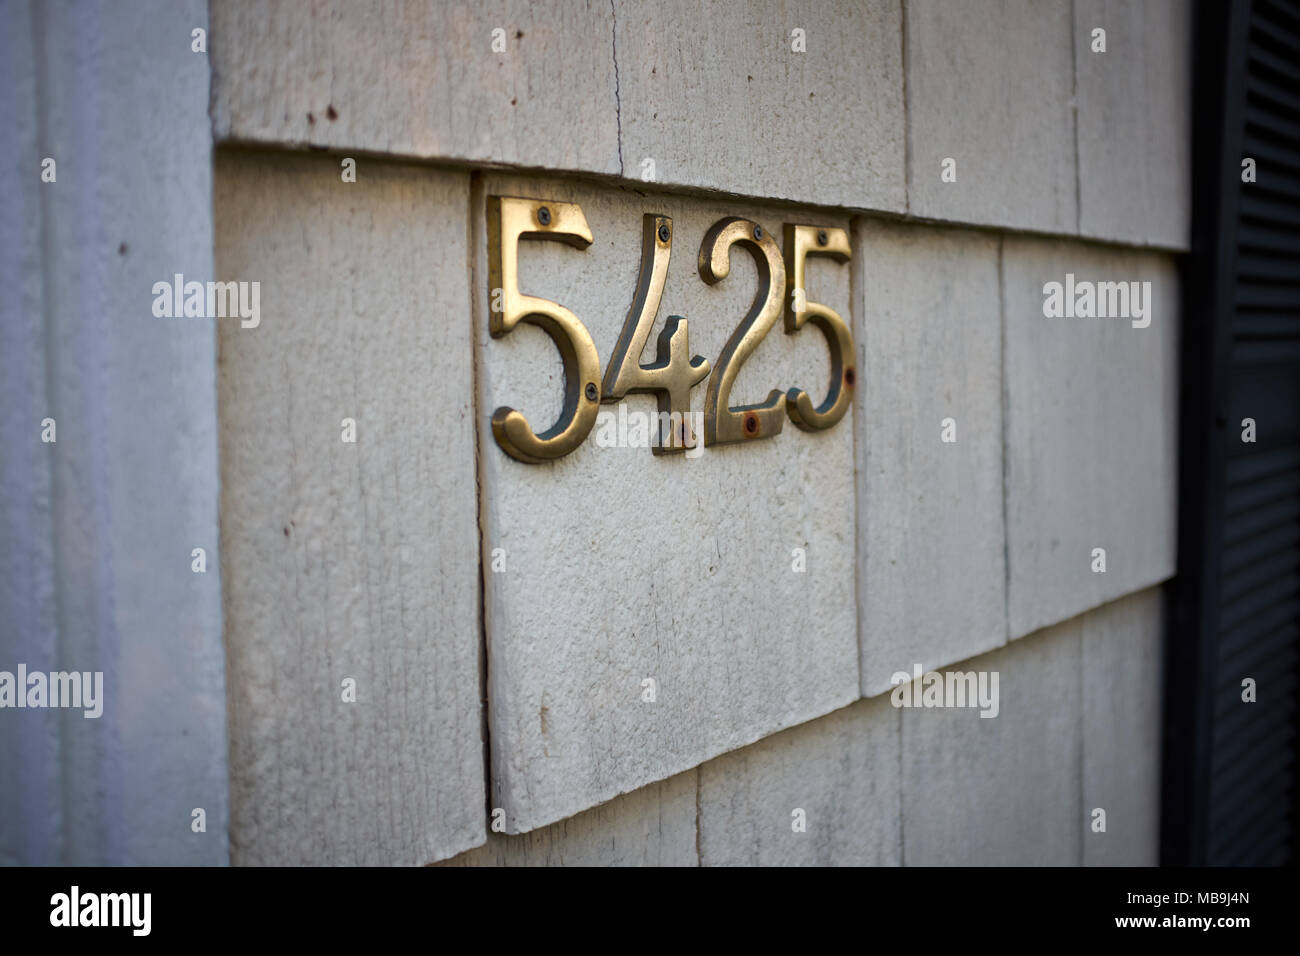 Brass number 5425 on an exterior wall mounted on the cladding identifying the property and address in an oblique angle view Stock Photo